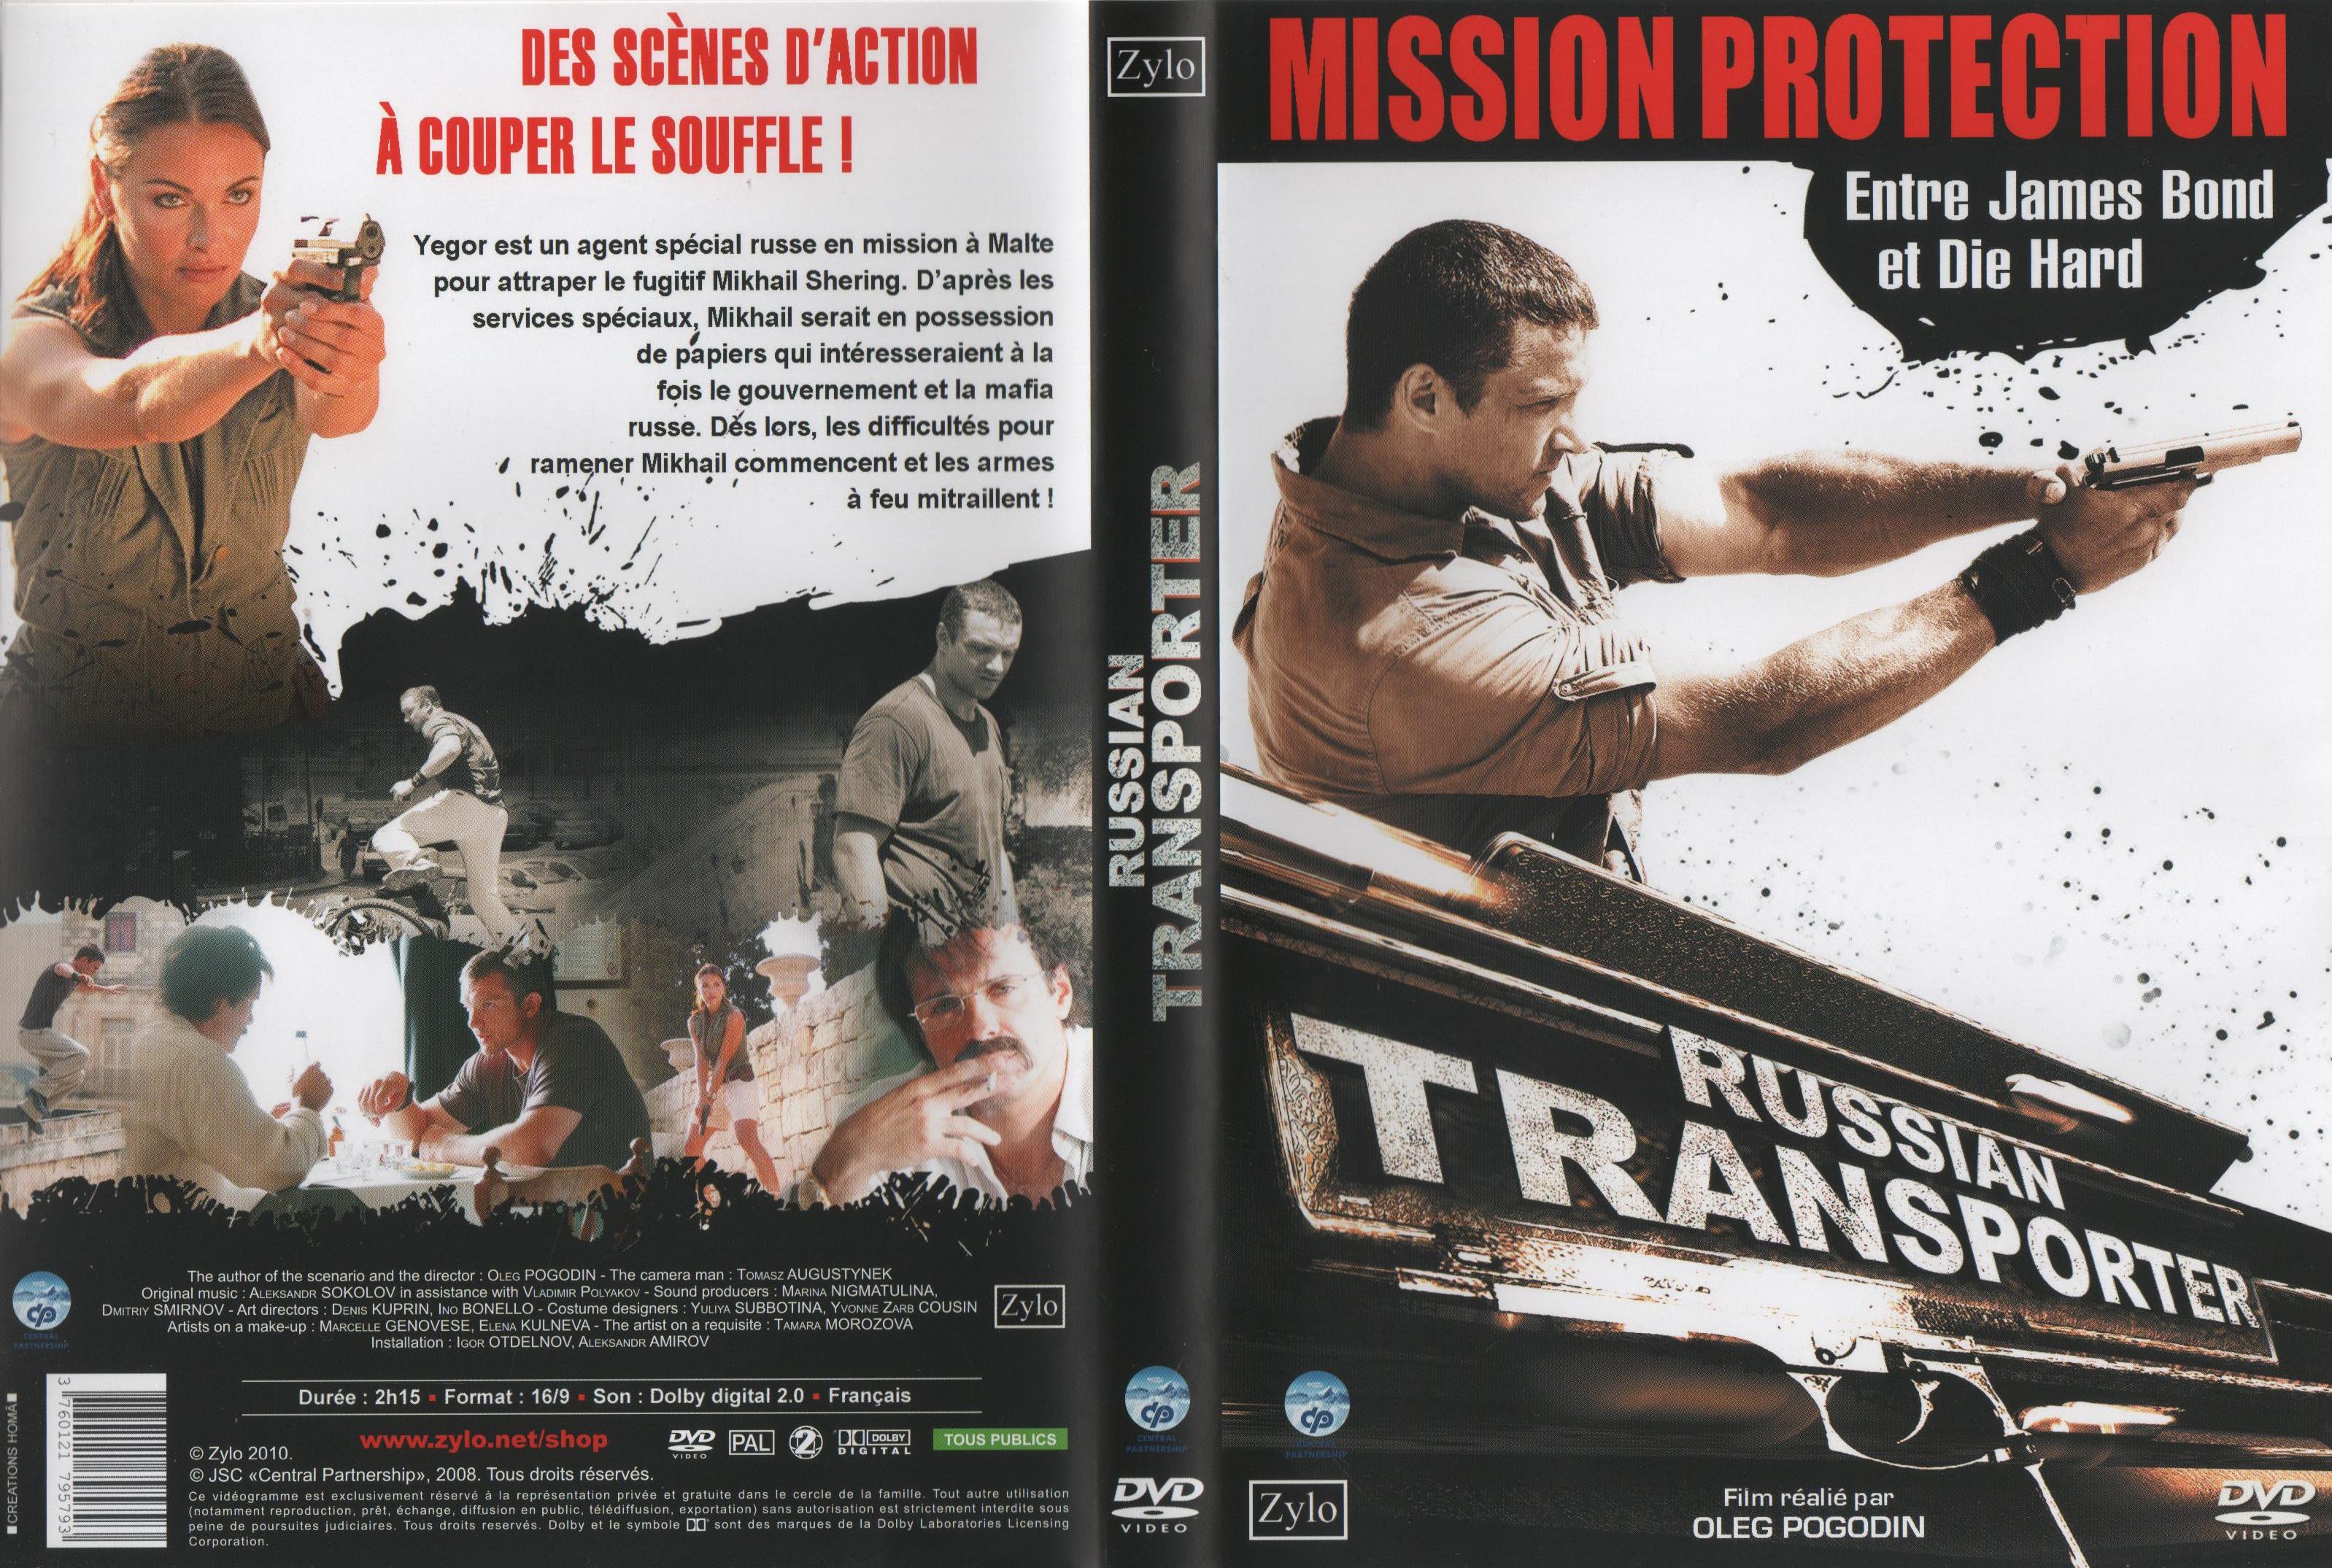 Jaquette DVD Russian transporter : Mission protection